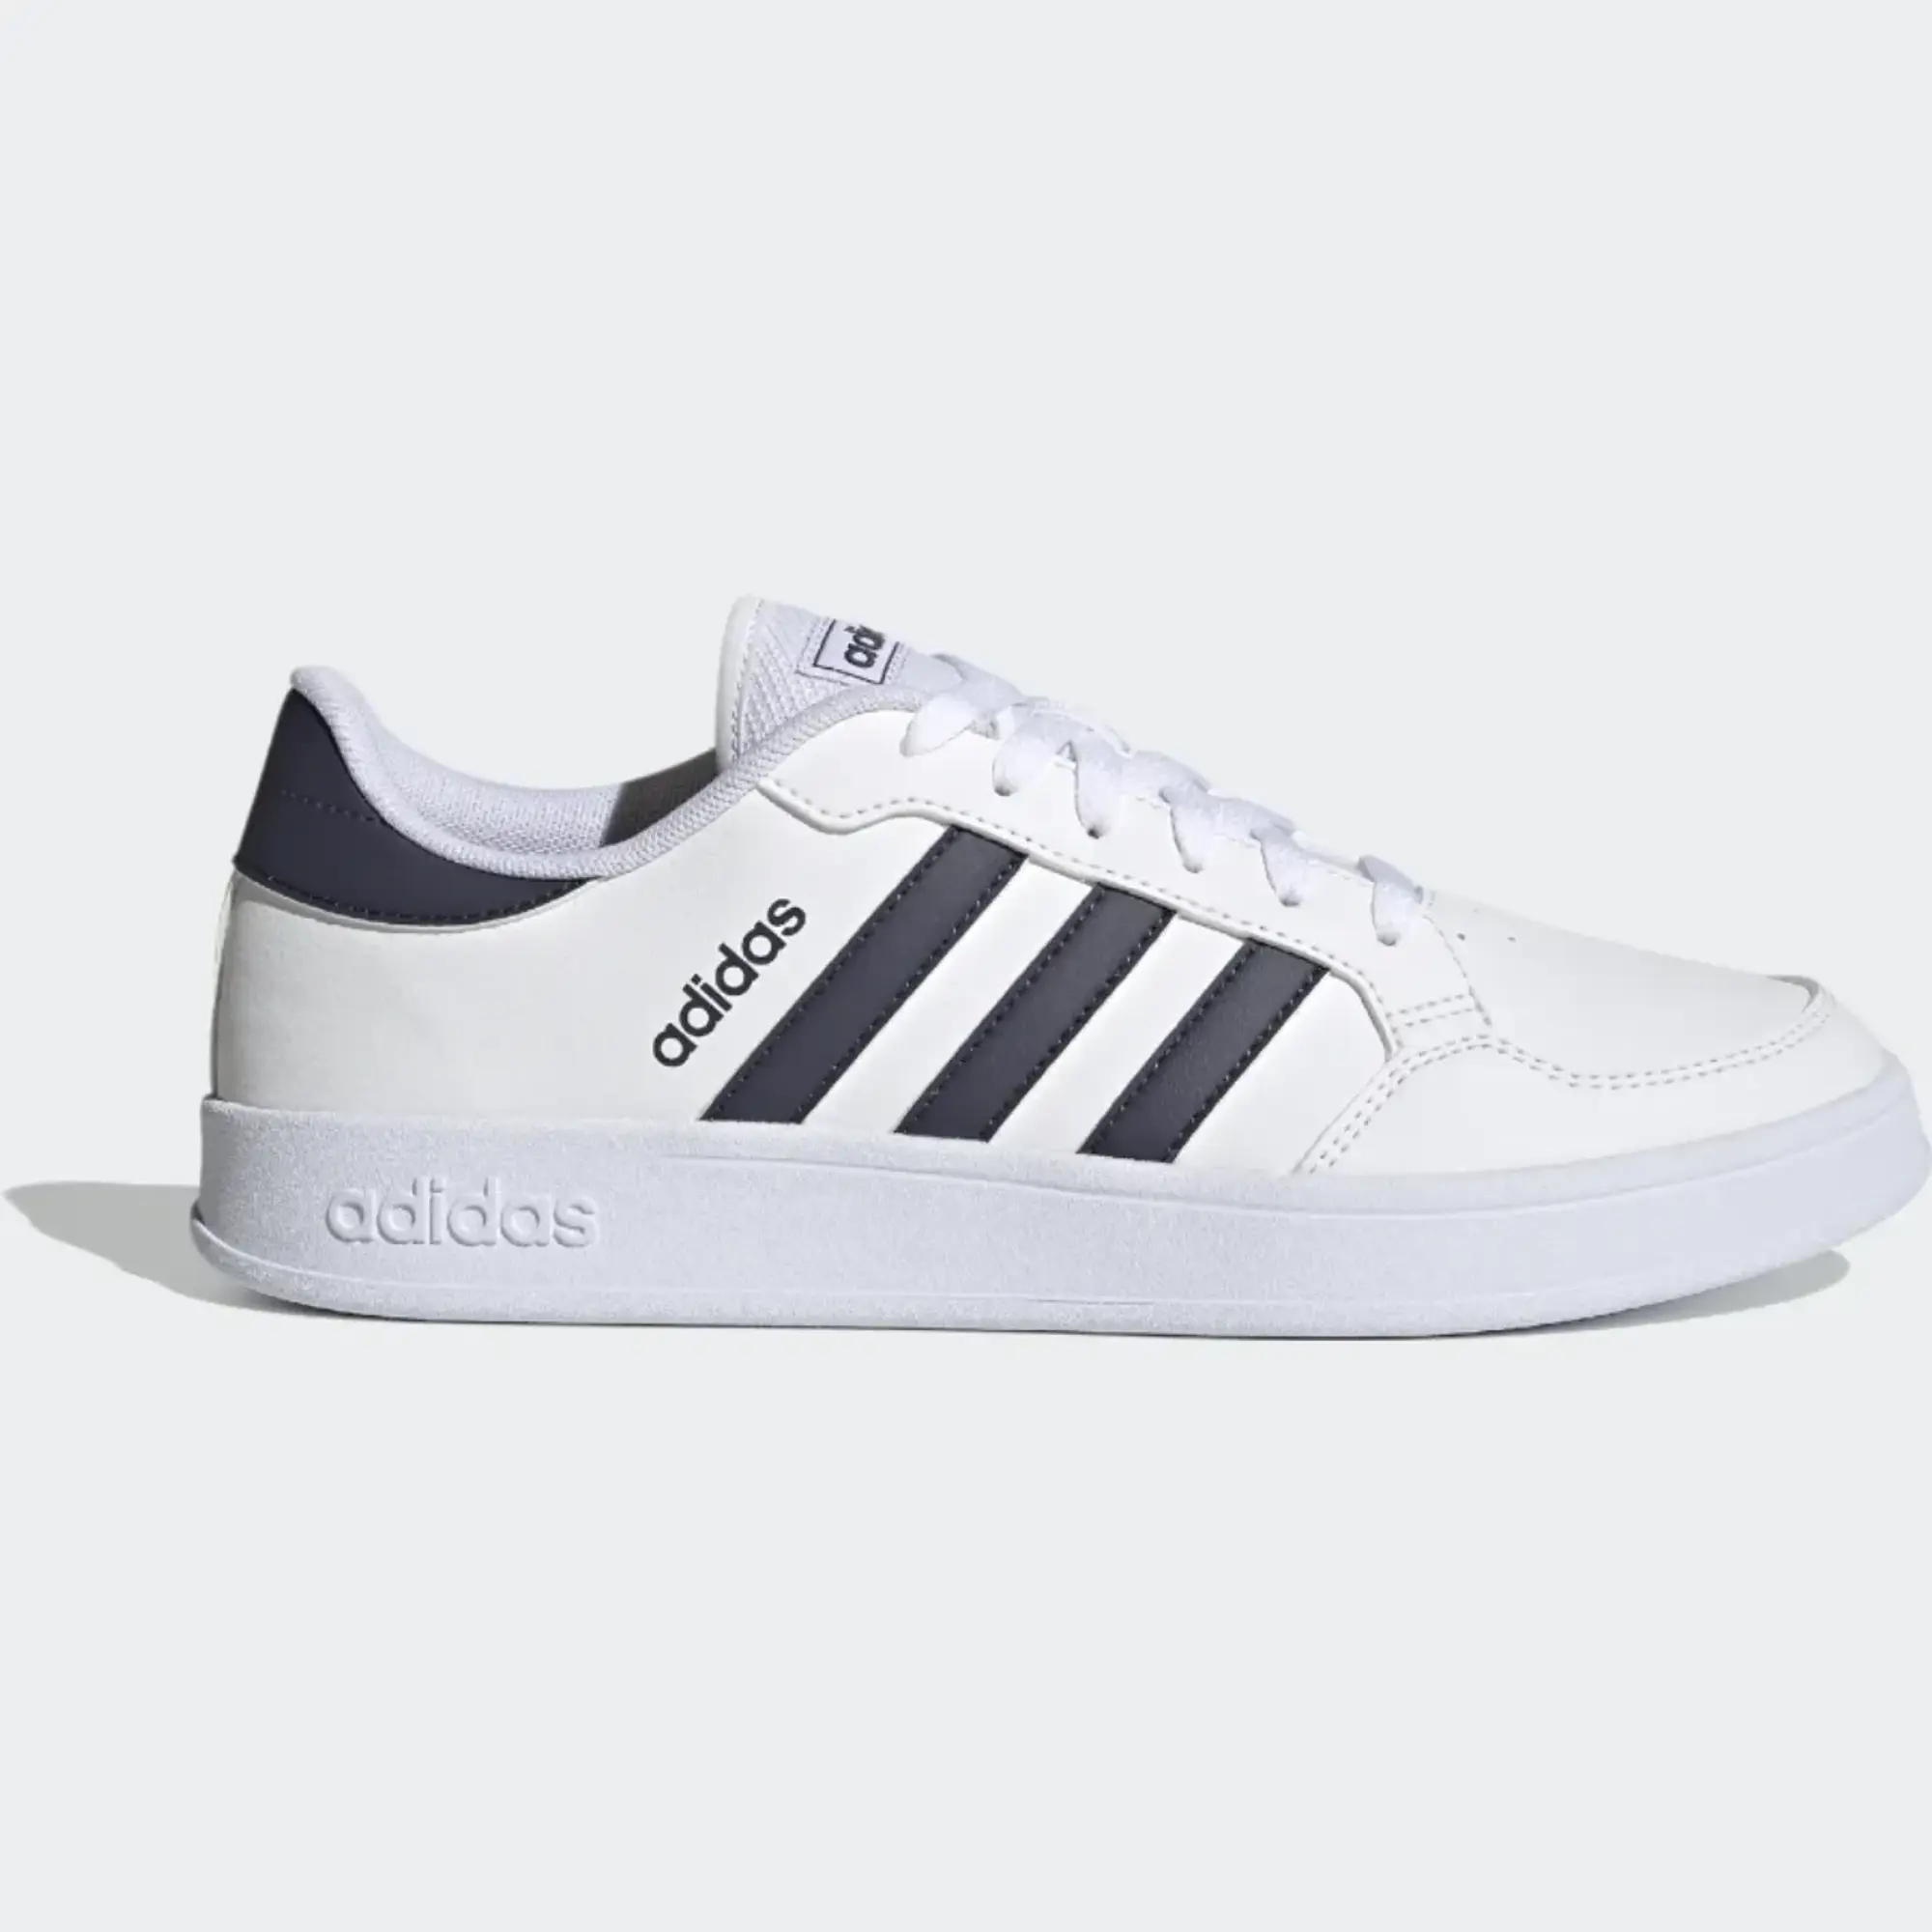 adidas Mens Breaknet Trainers in White Navy - Blue & White